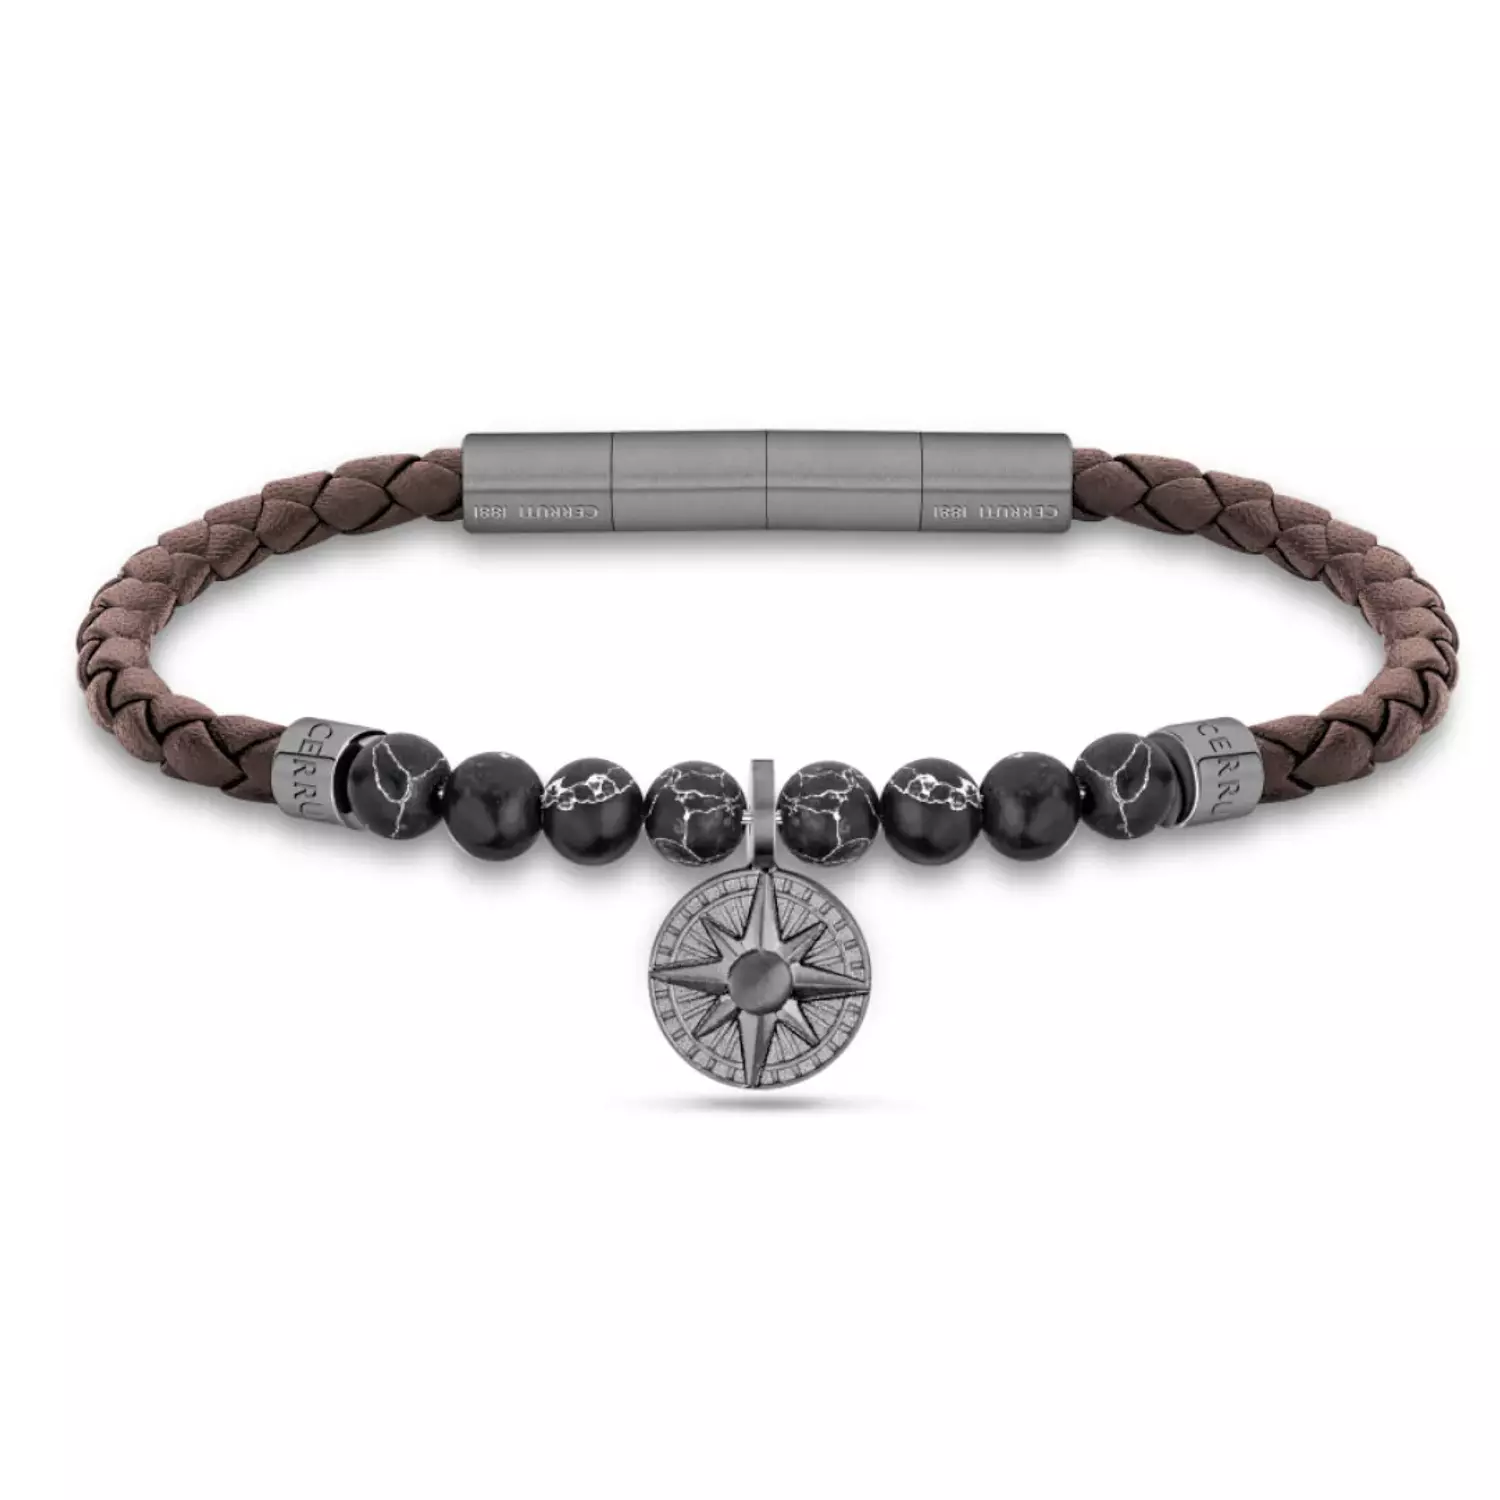 Cerruti Bracelet For Men, Brown Braided Leather & Black Beads/ Compass Charm  hover image